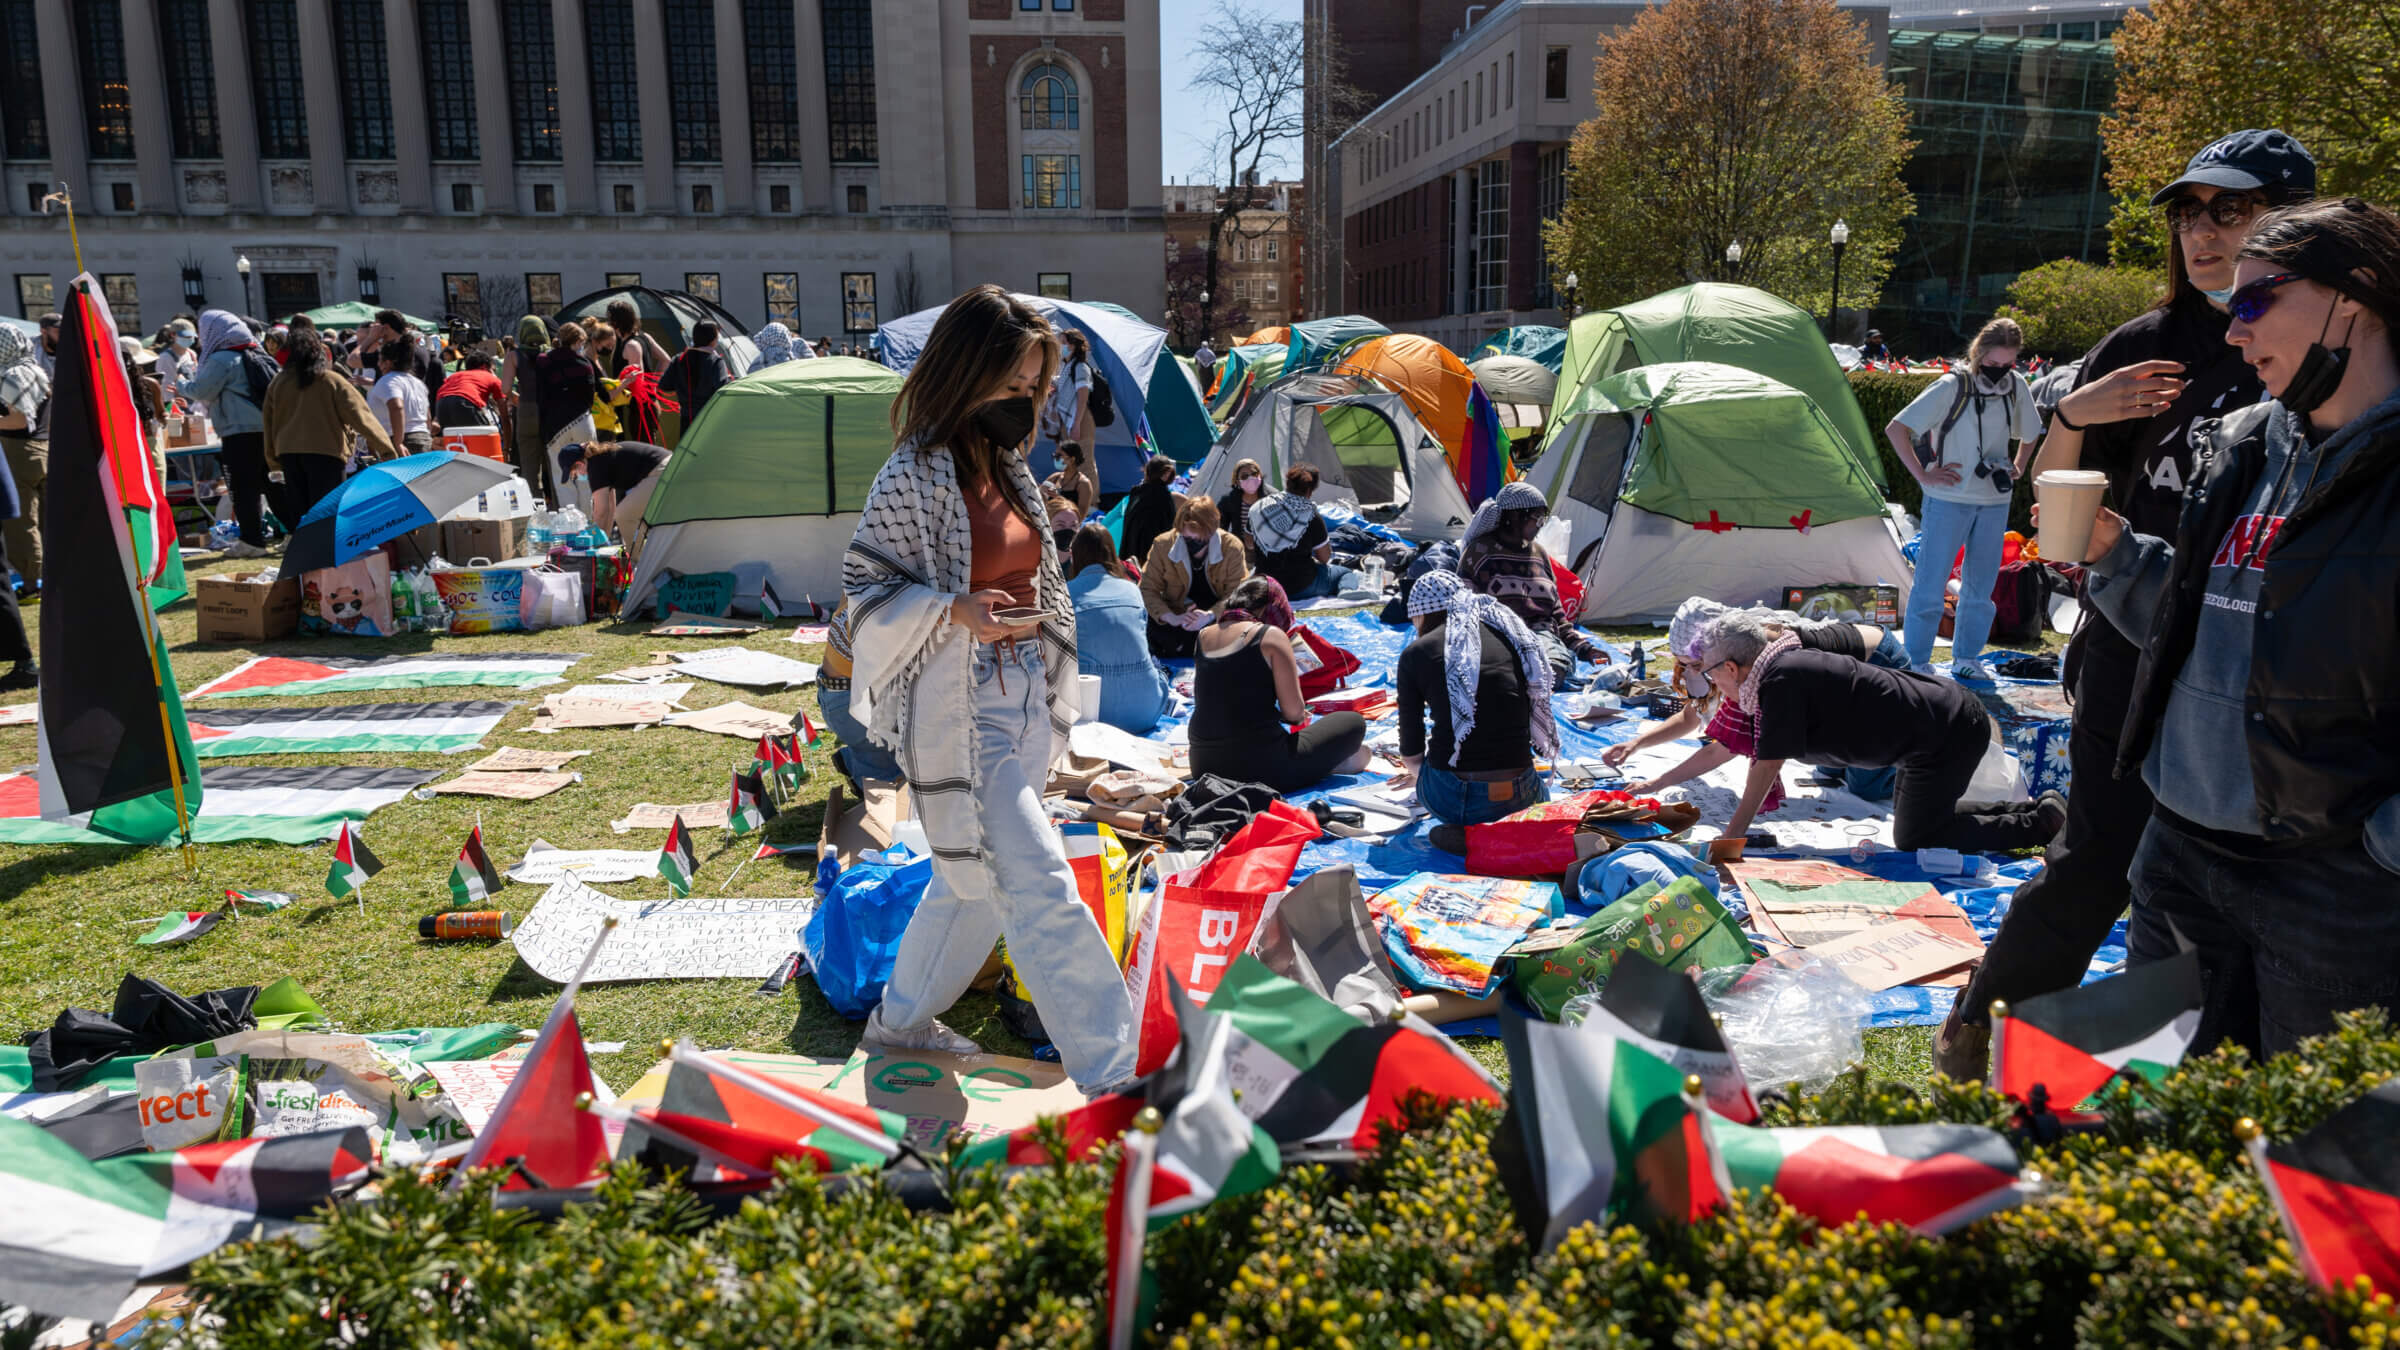 Pro-Palestinian supporters set up a protest encampment on the campus of Columbia University Monday. All classes at Columbia University have been held virtually today after school President Minouche Shafik announced a shift to online learning in response to recent campus unrest.